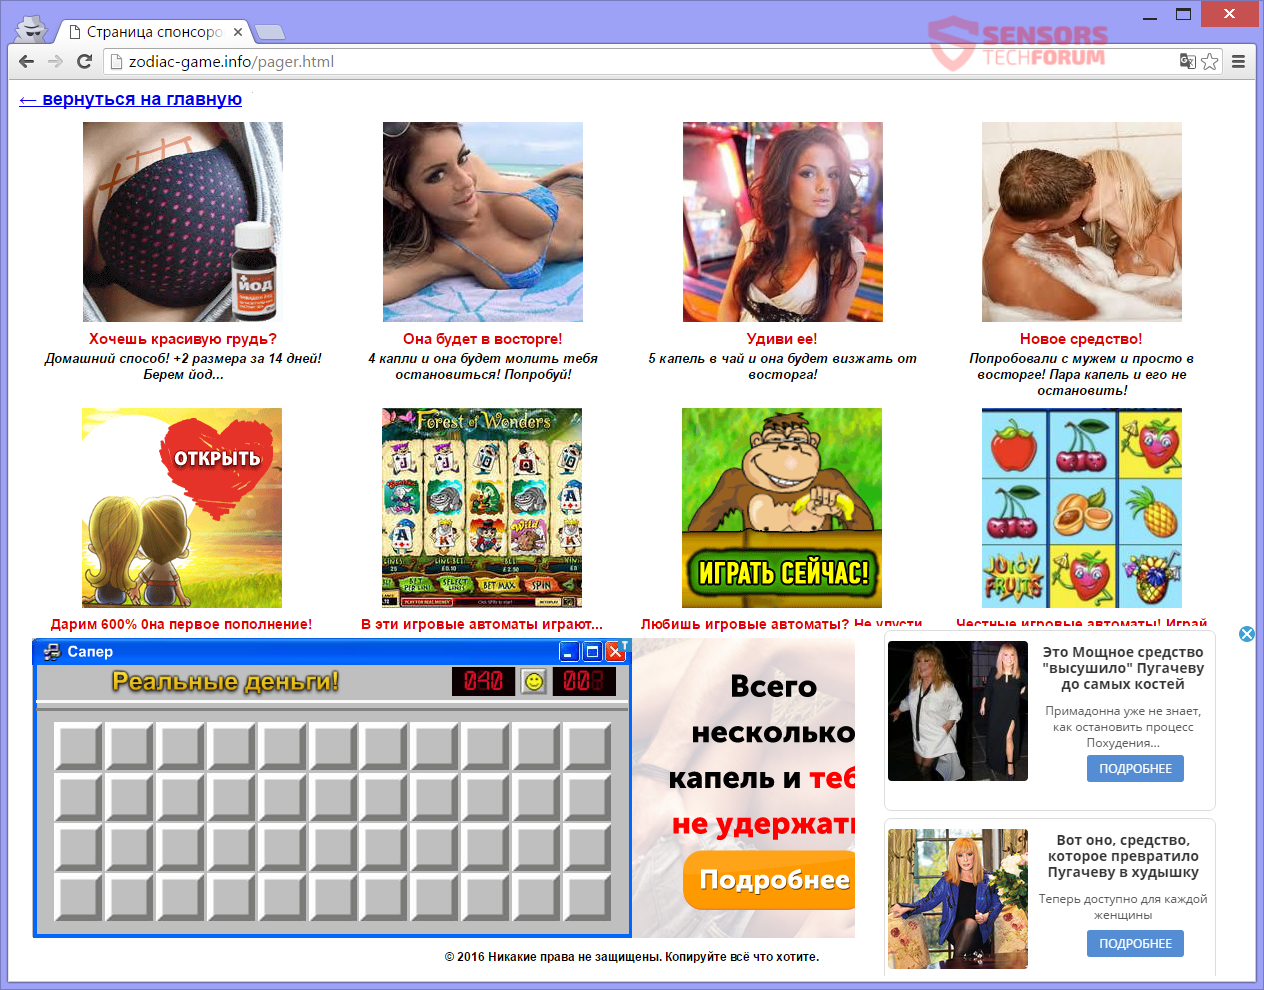 STF-zodiac-game-info-adware-advertenties-full-page-advertenties